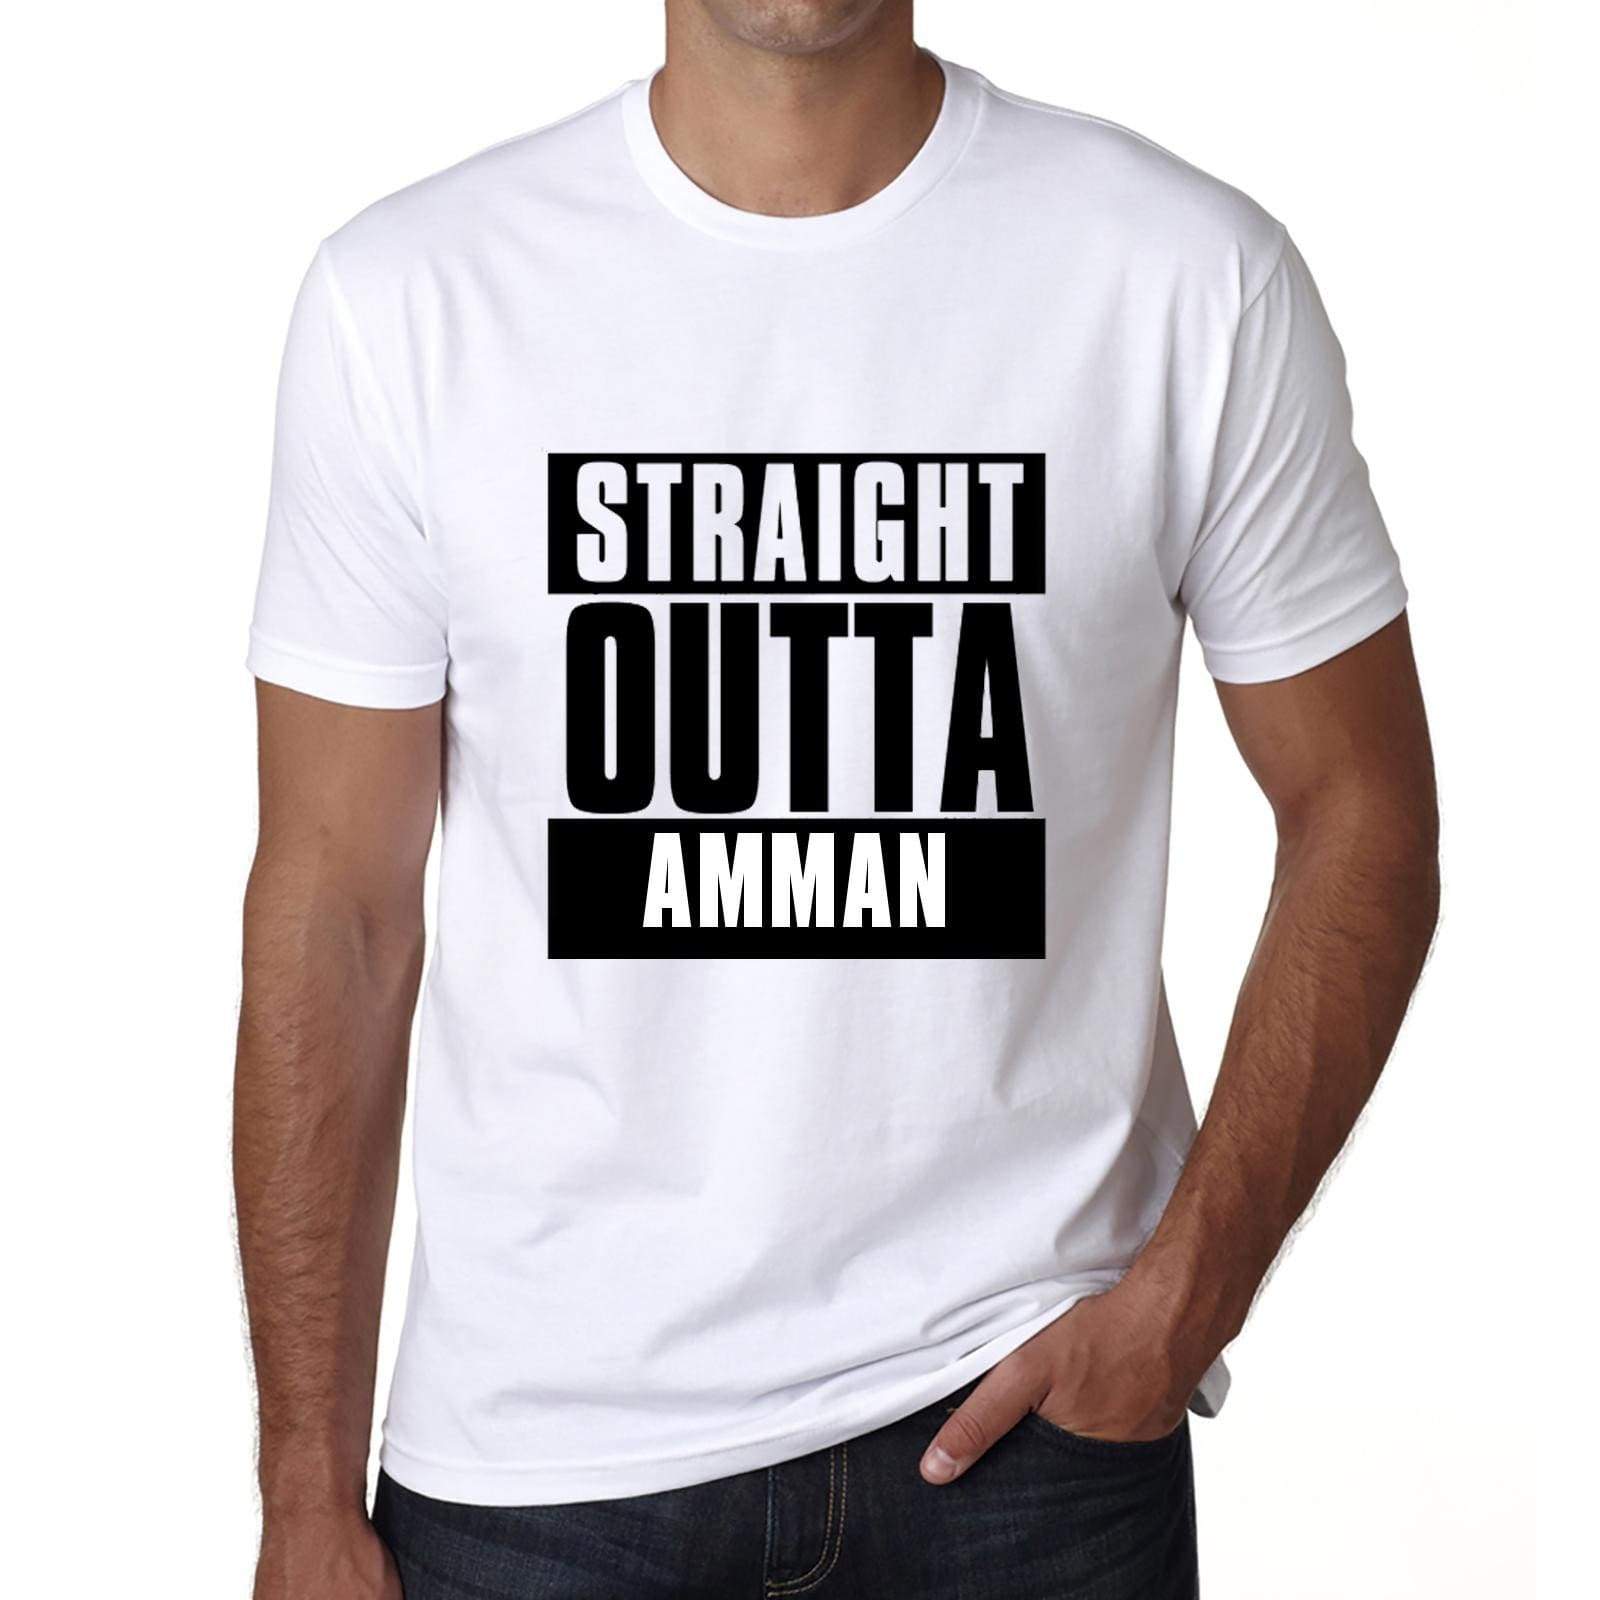 Straight Outta Amman Mens Short Sleeve Round Neck T-Shirt 00027 - White / S - Casual